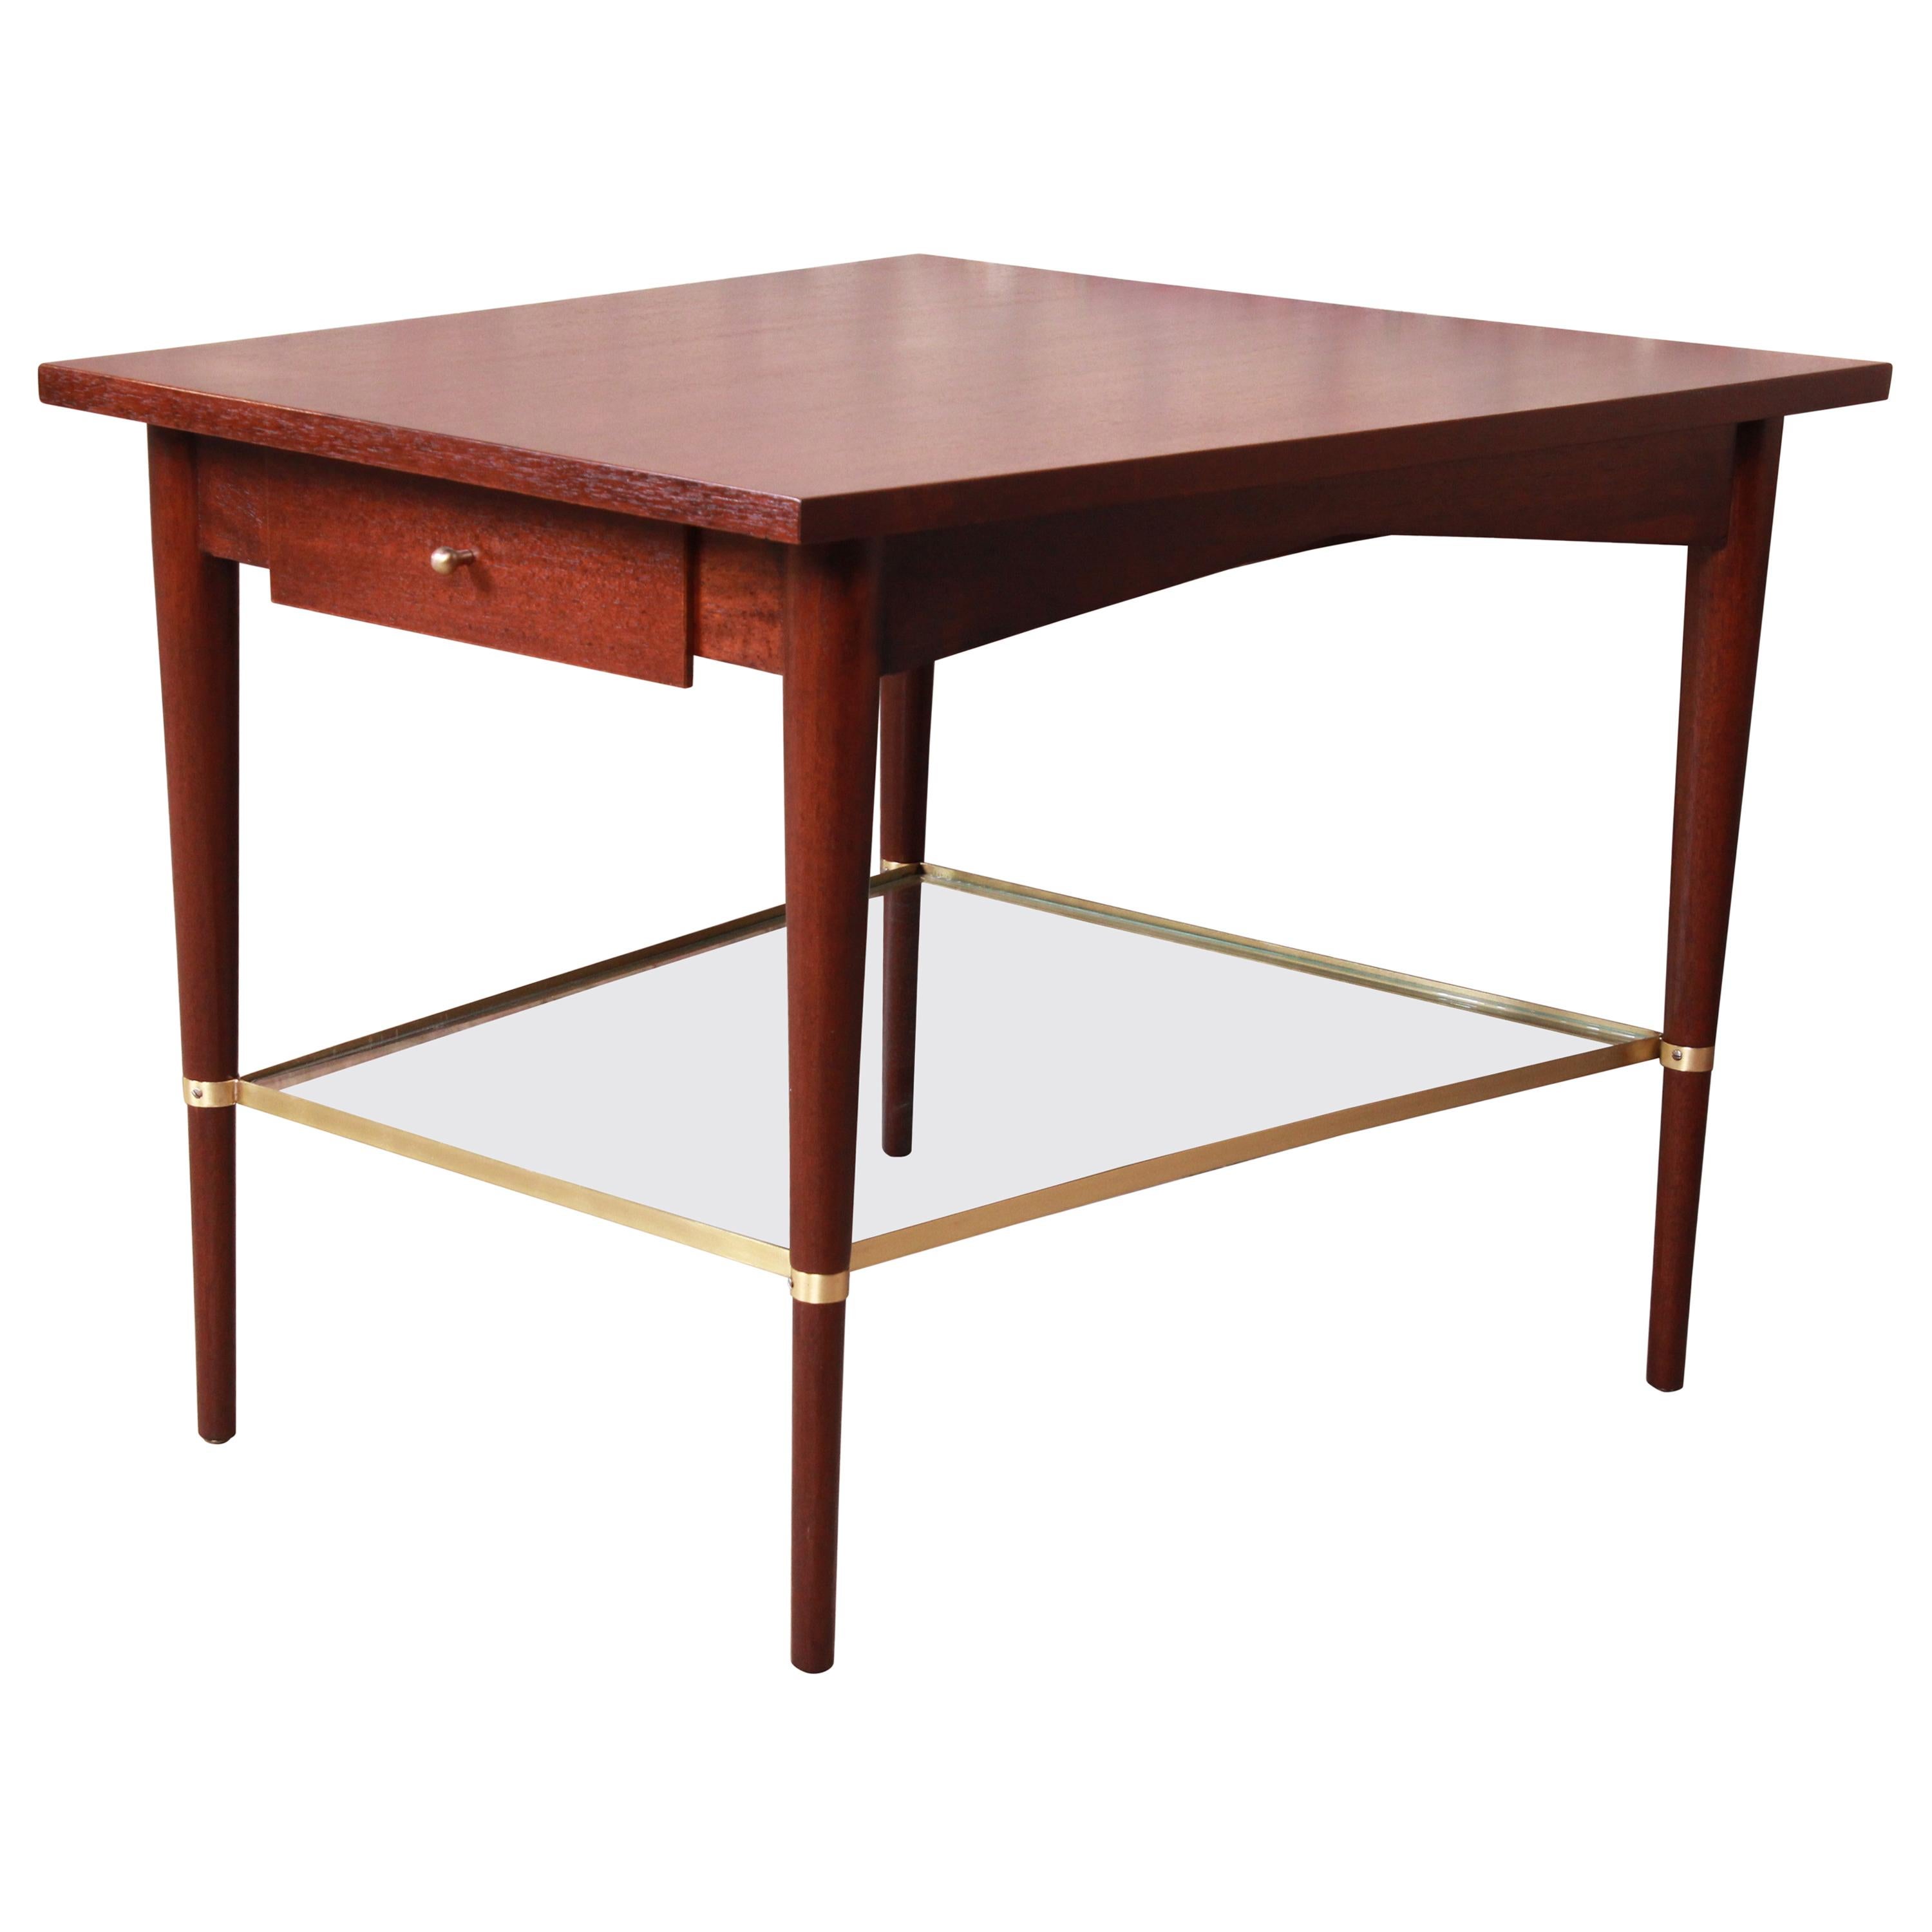 Paul McCobb Connoisseur Collection Mahogany and Brass Wedge Side Table, Restored